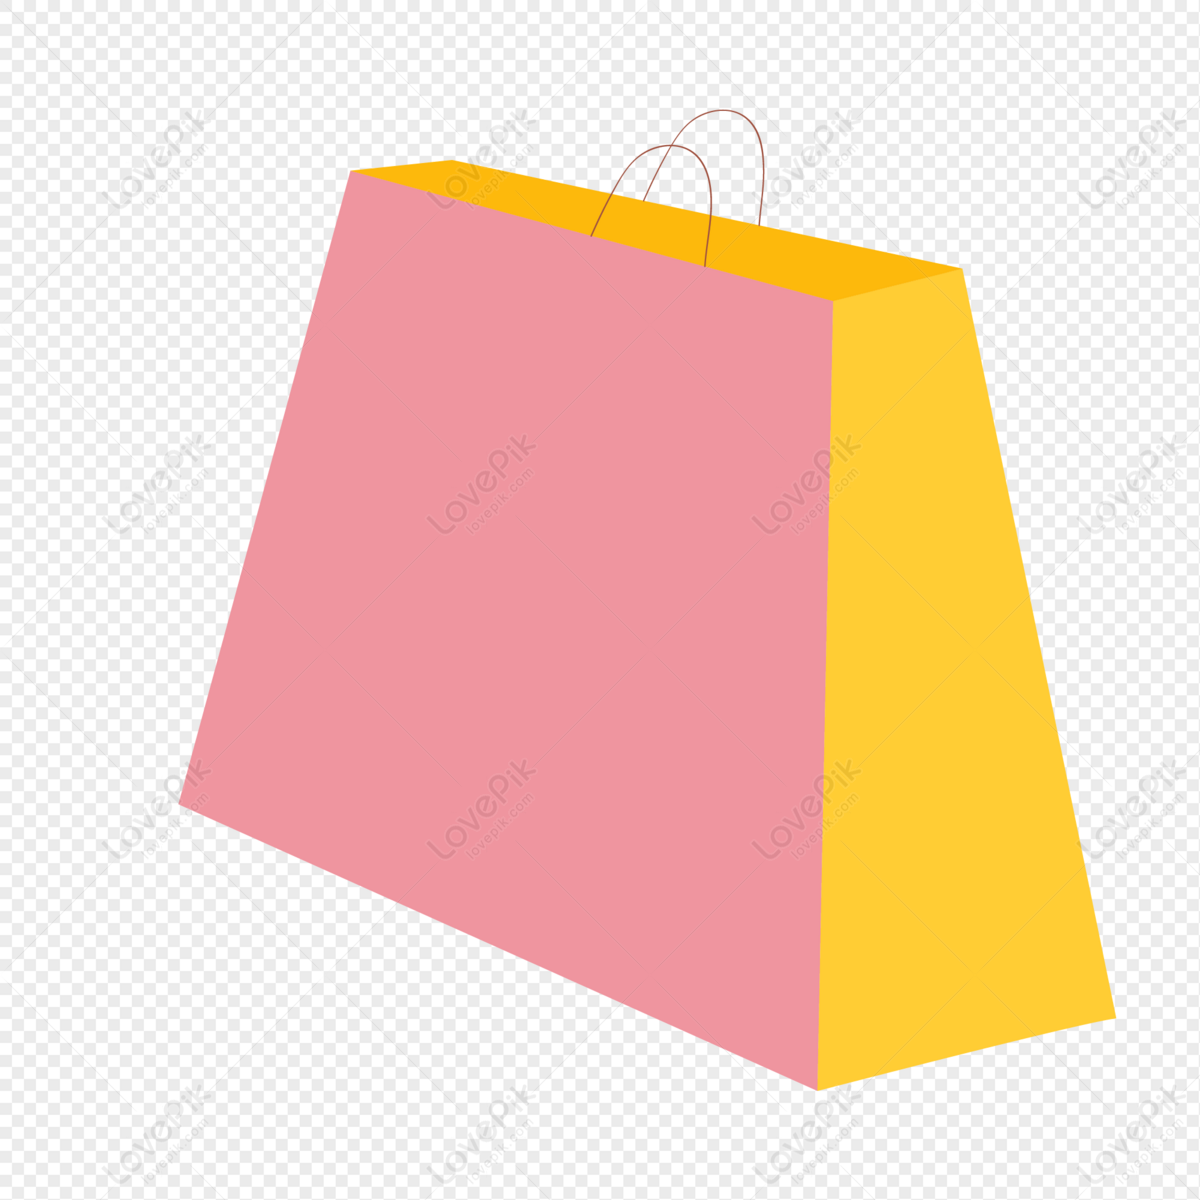 Shopping Bag PNG Picture And Clipart Image For Free Download - Lovepik ...